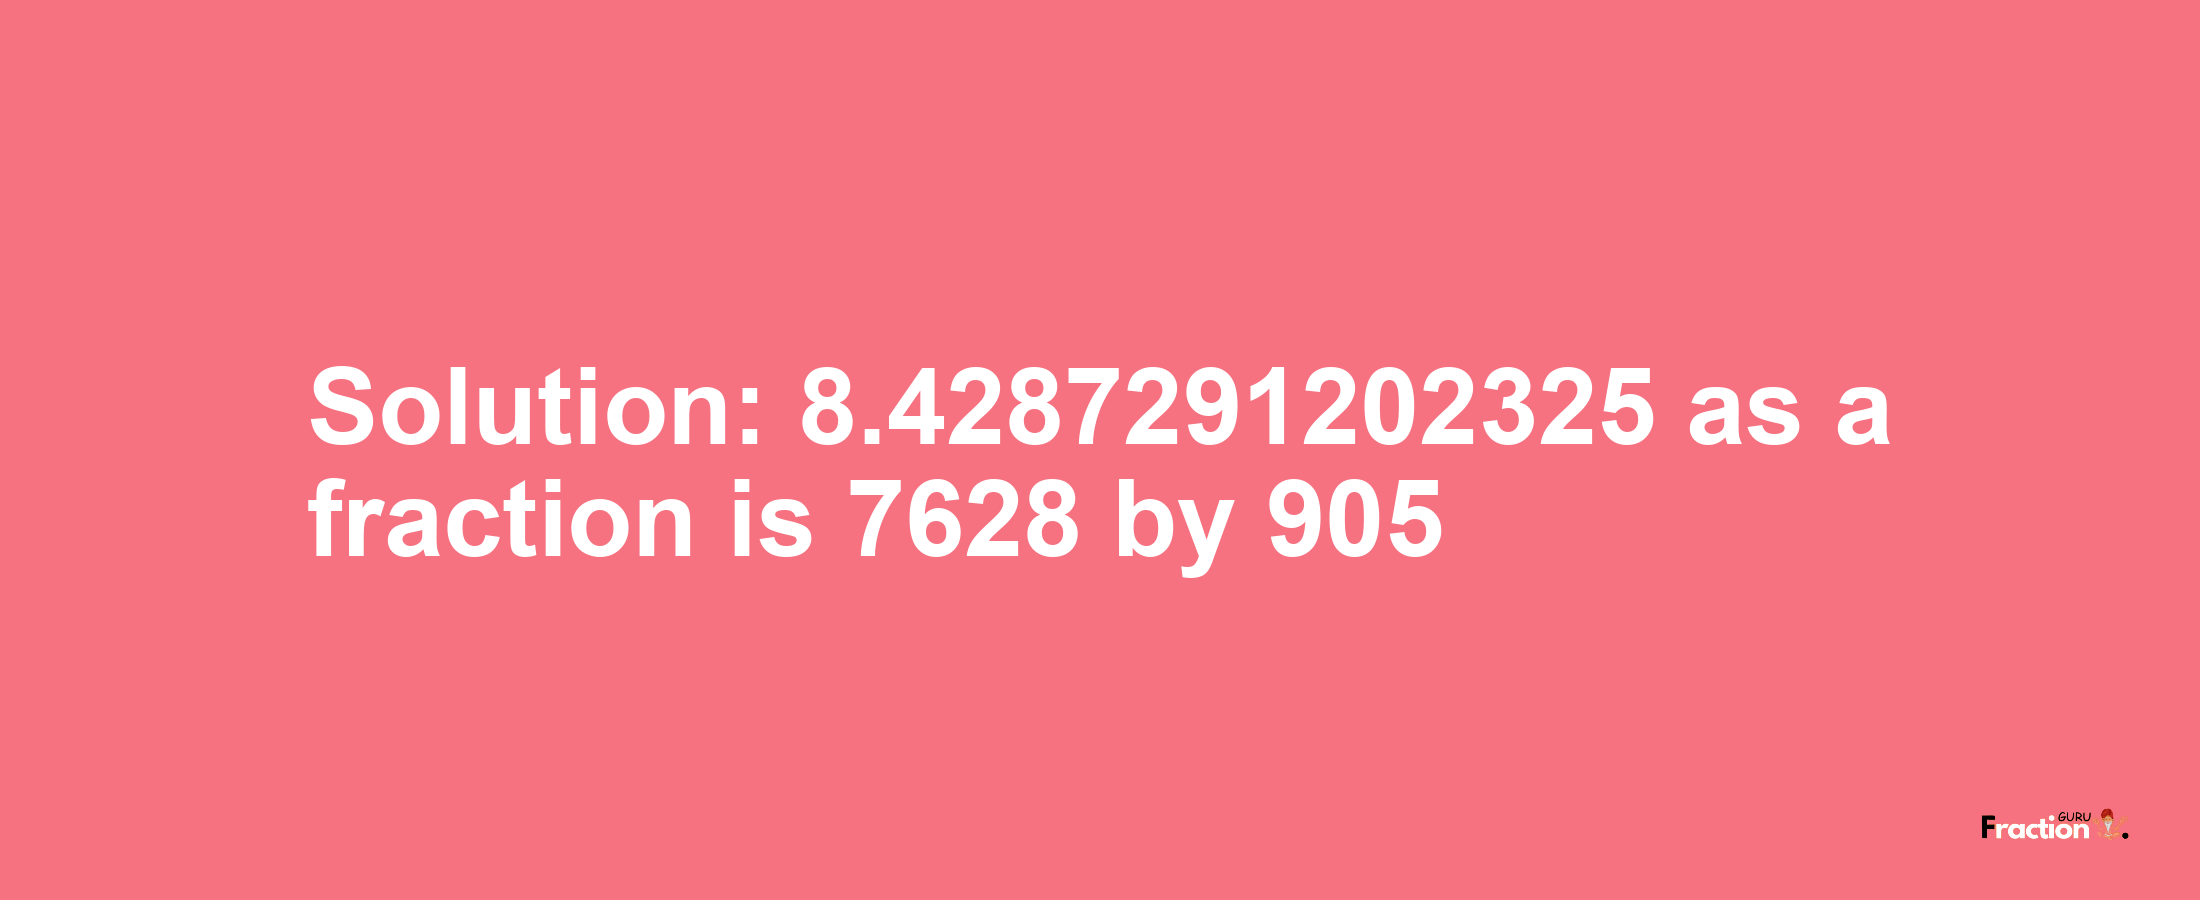 Solution:8.4287291202325 as a fraction is 7628/905